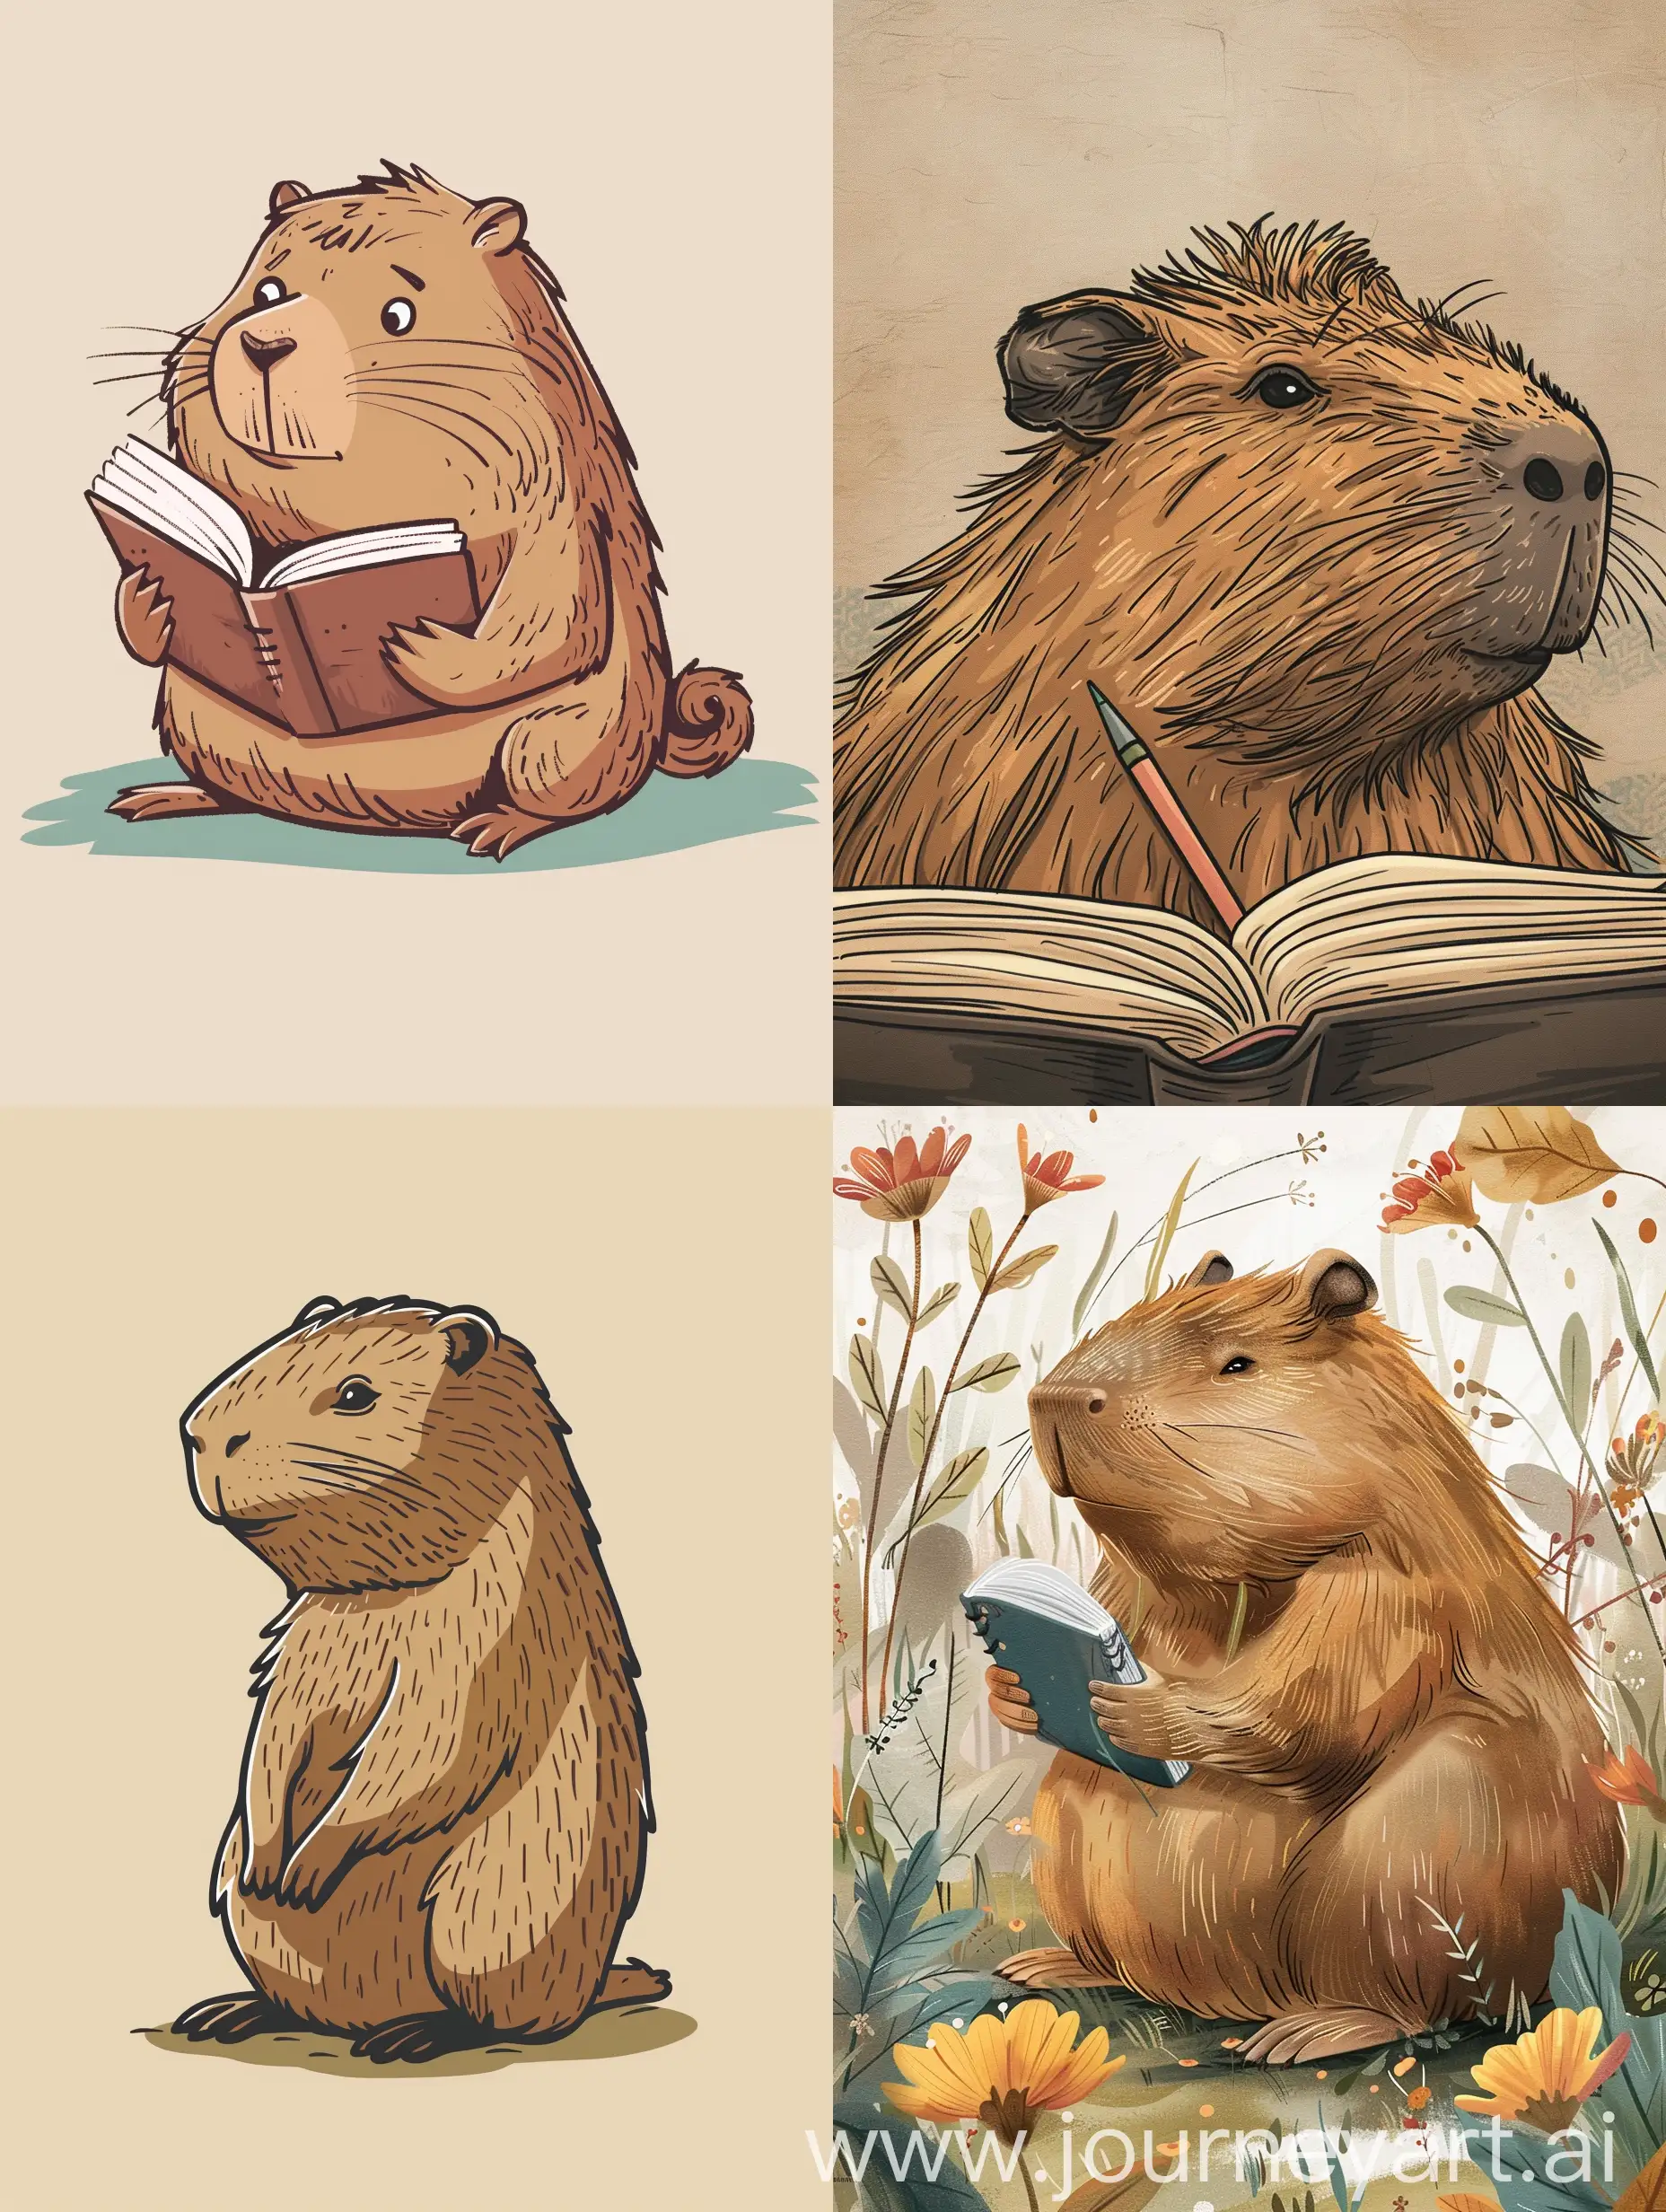 Notebook-Cover-with-Cartoon-Capybara-Learning-to-Write-Beautifully